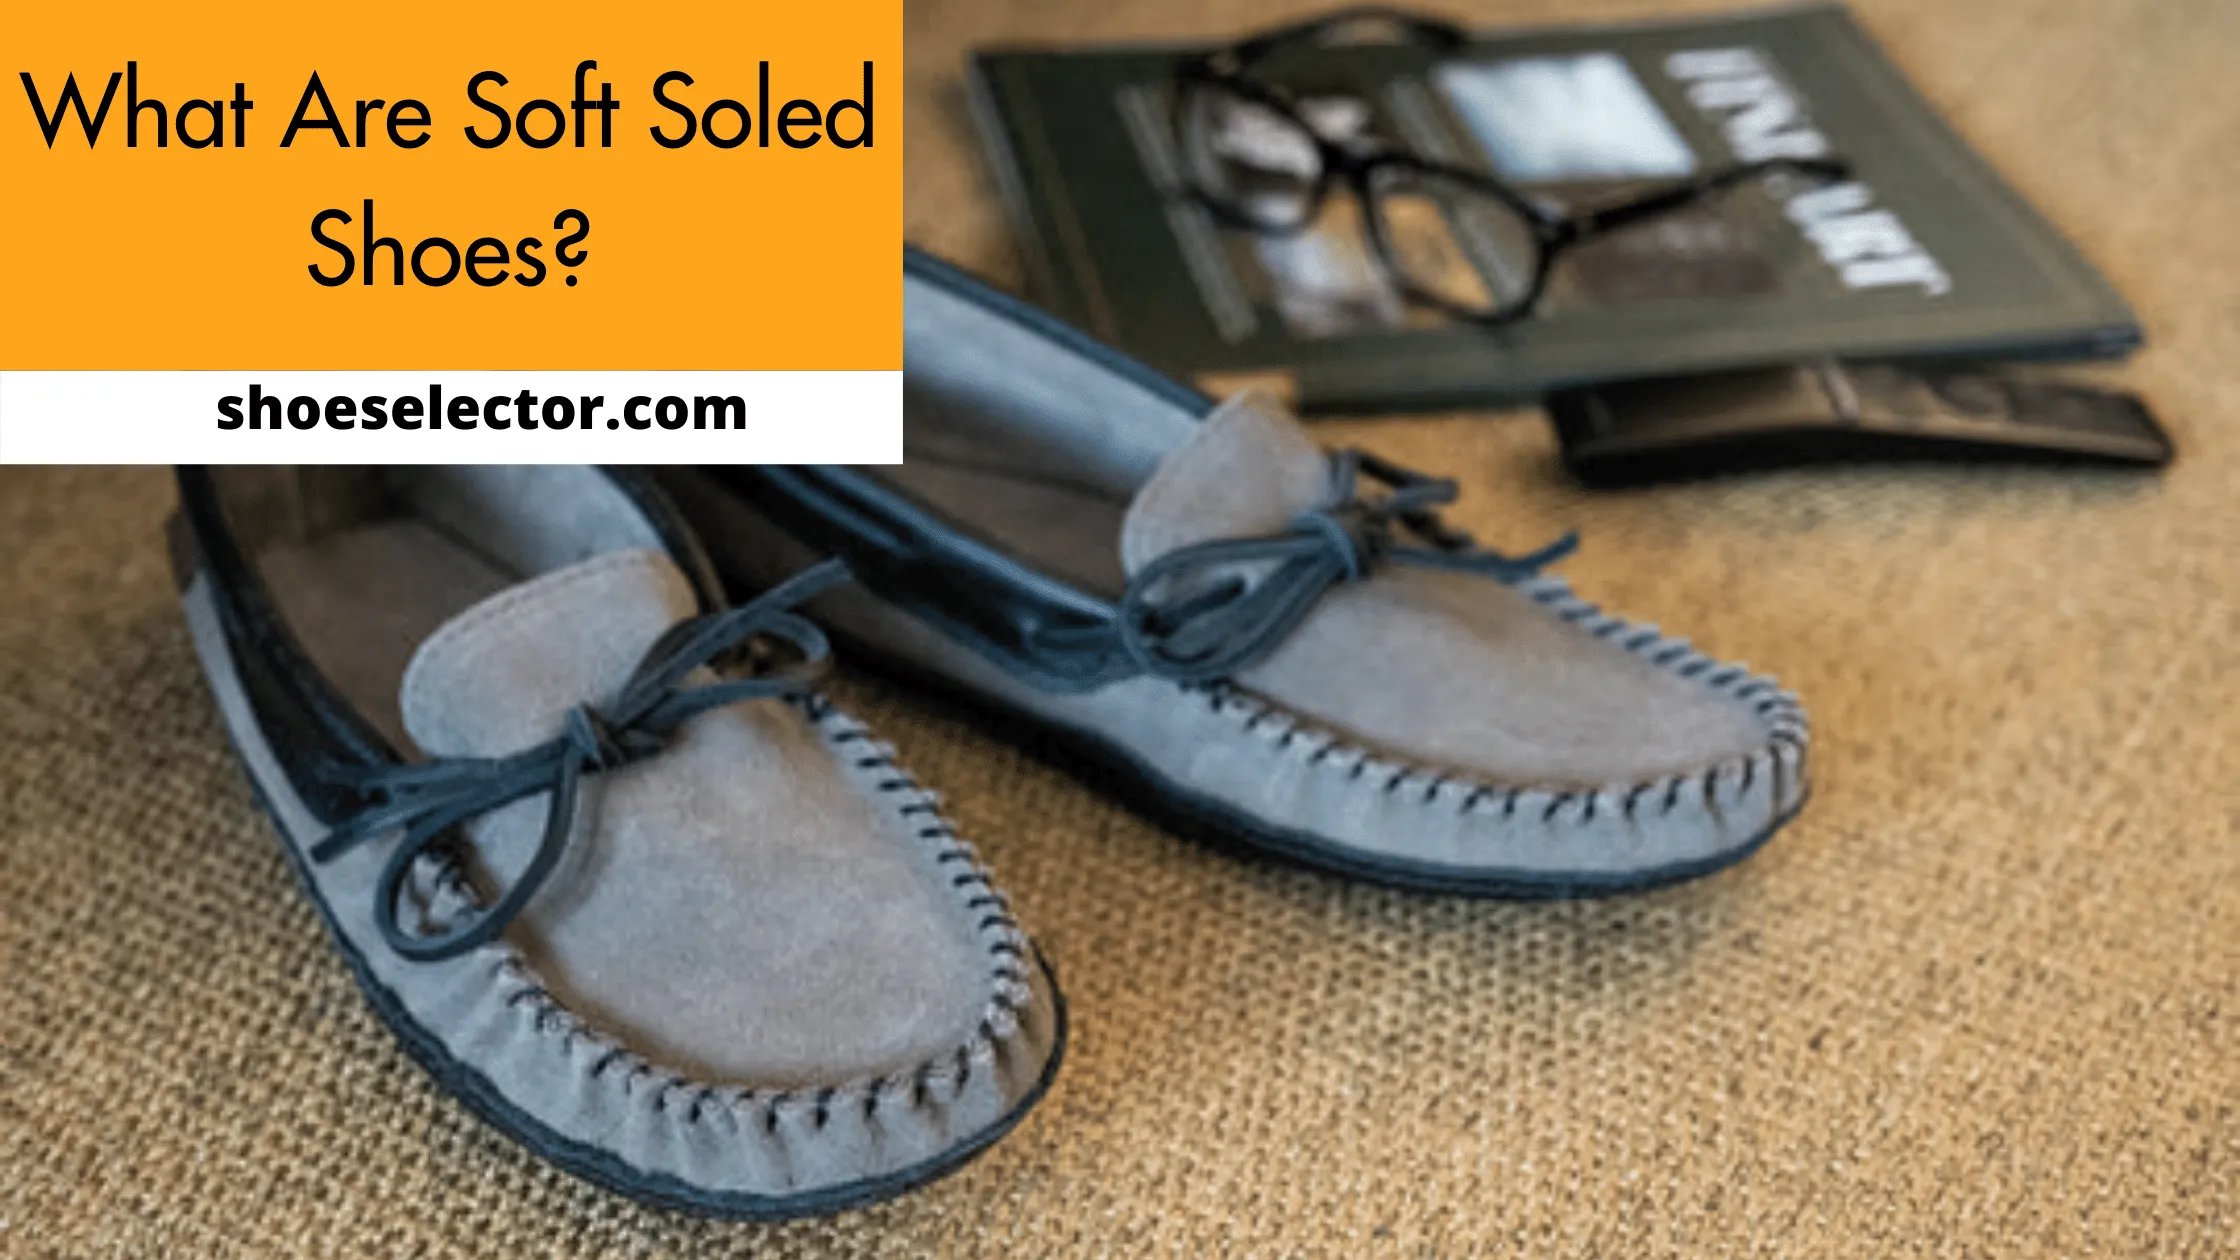 What Are Soft Soled Shoes? - Complete Guide